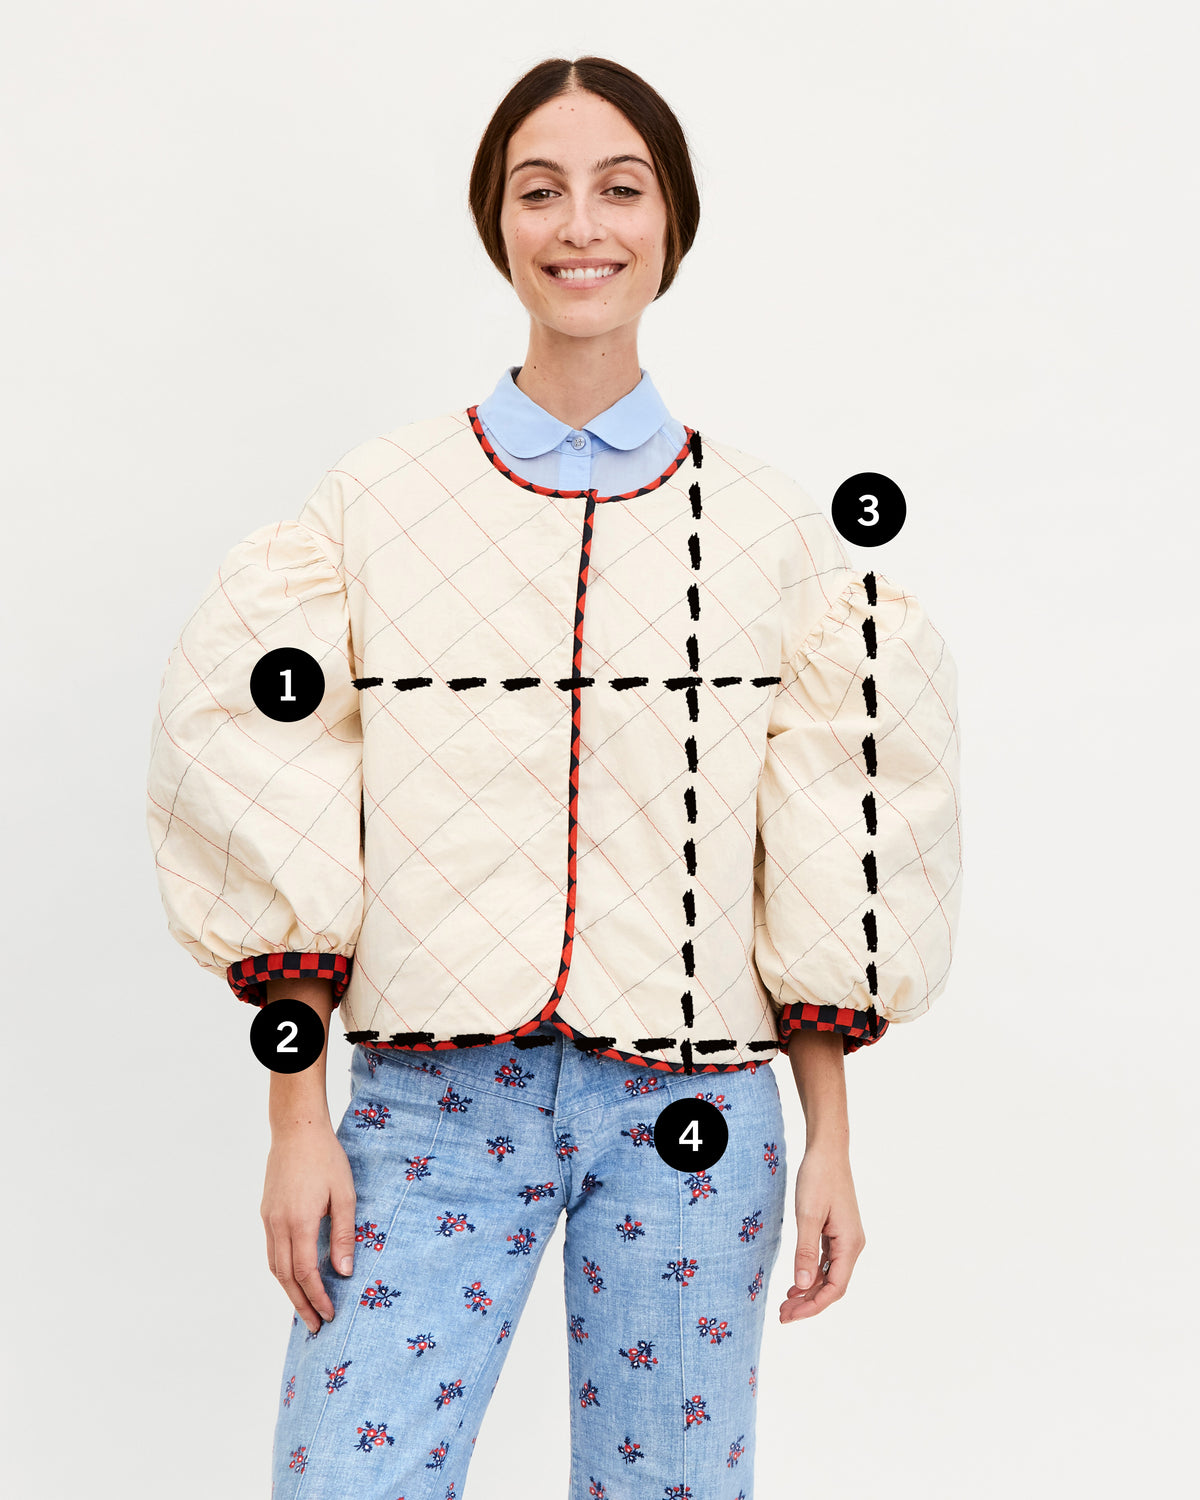 image of Frannie in a white jacket with 4 lines depicting where the user should measure for their bust, sweep, sleeve and length measurements in comparison to the garment